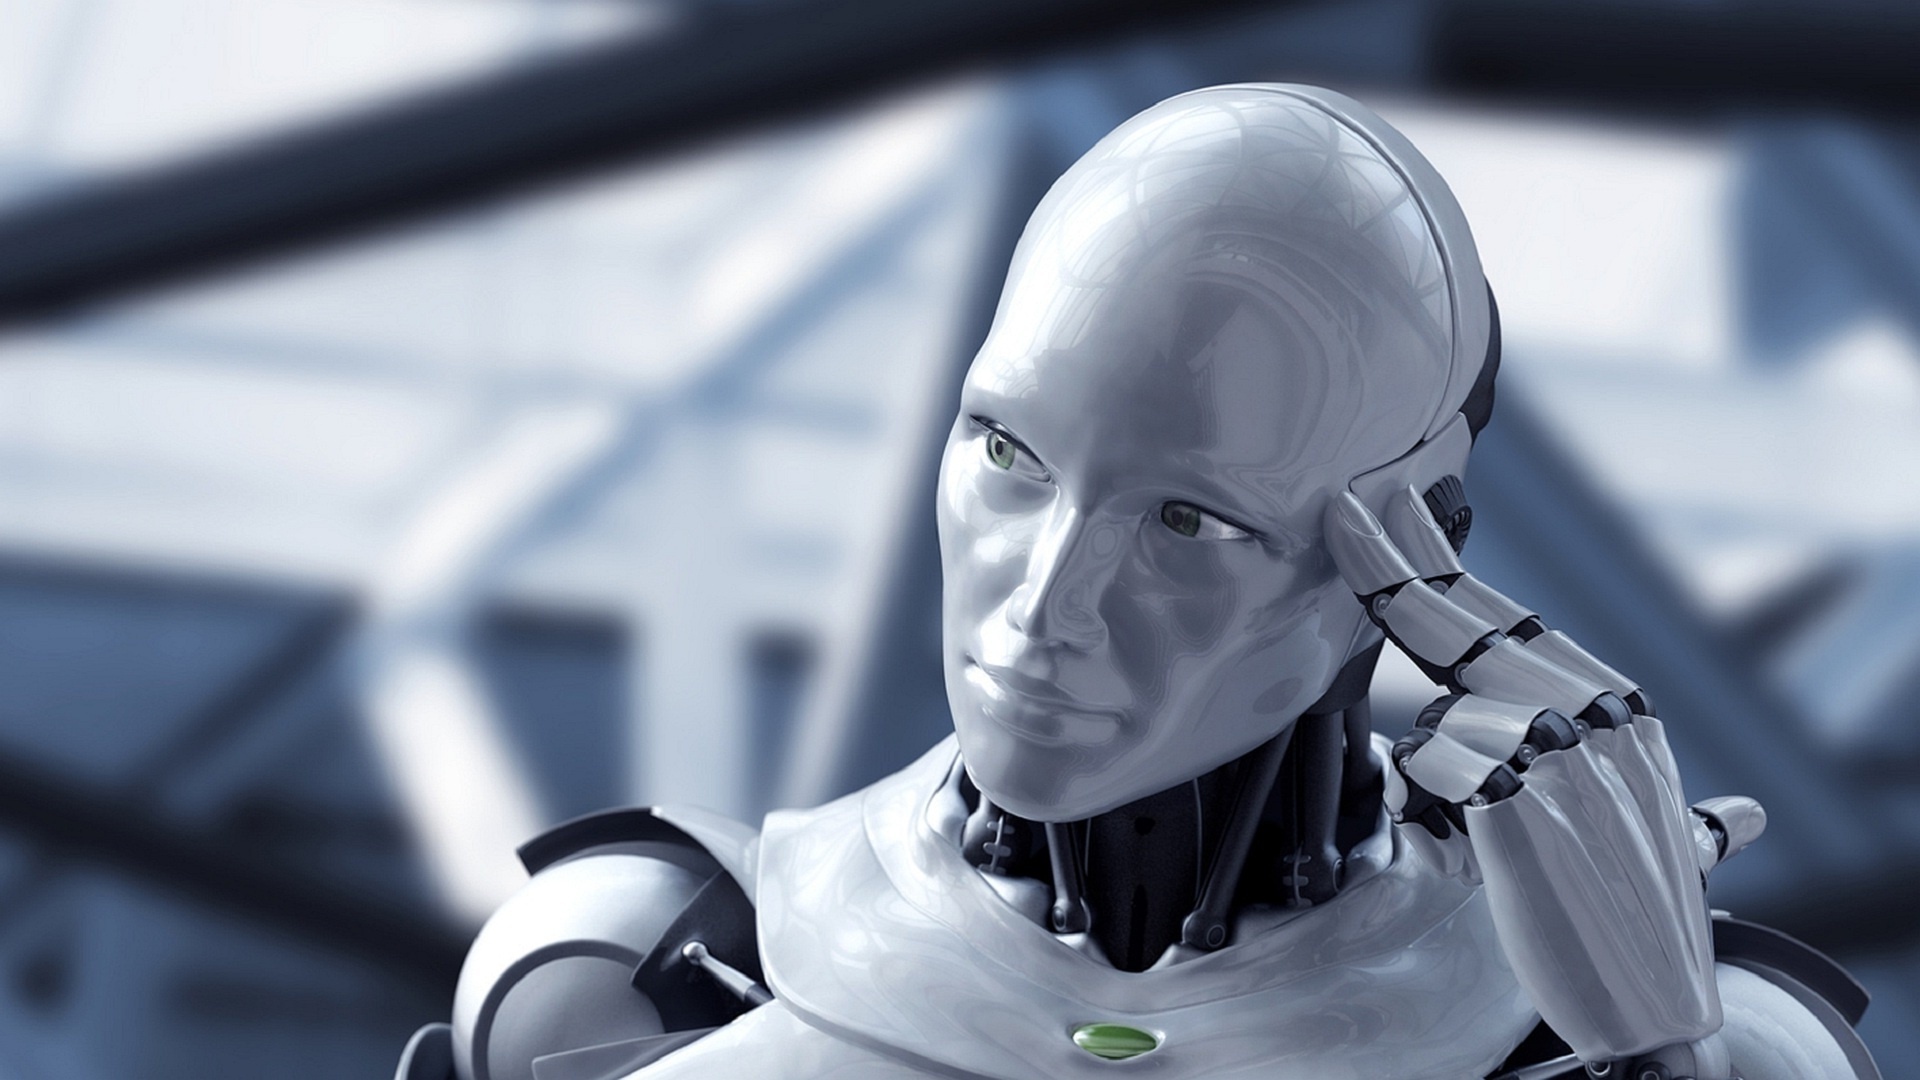 Robot: Artificial intelligence, Making humans more effective, efficient, and enhanced. 1920x1080 Full HD Background.